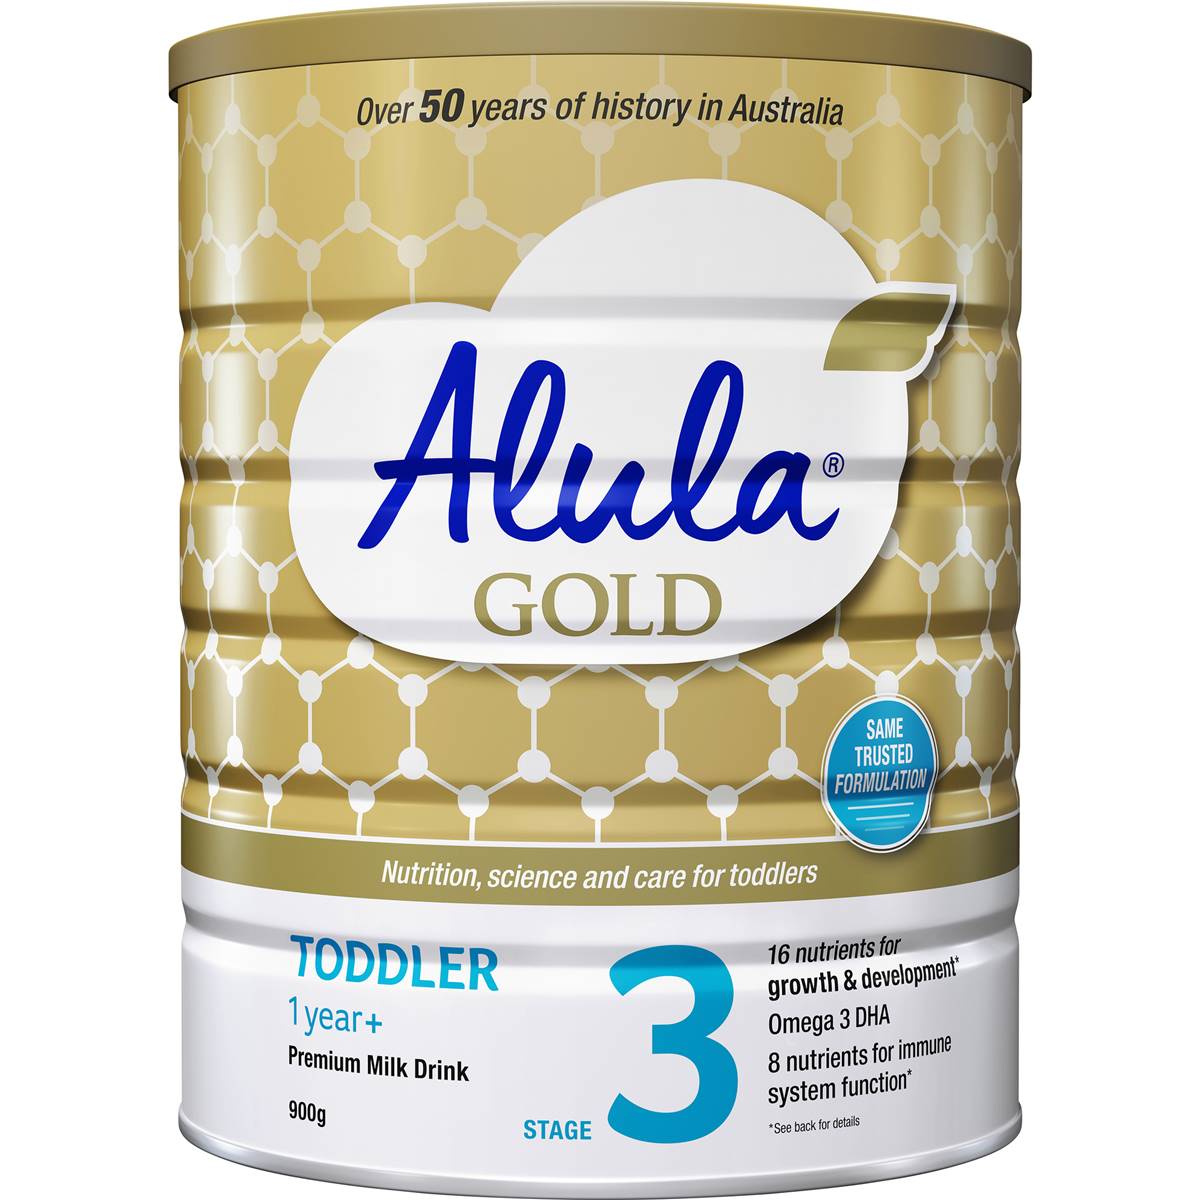 Calories in S-26 Alula Gold Toddler 1 Year +